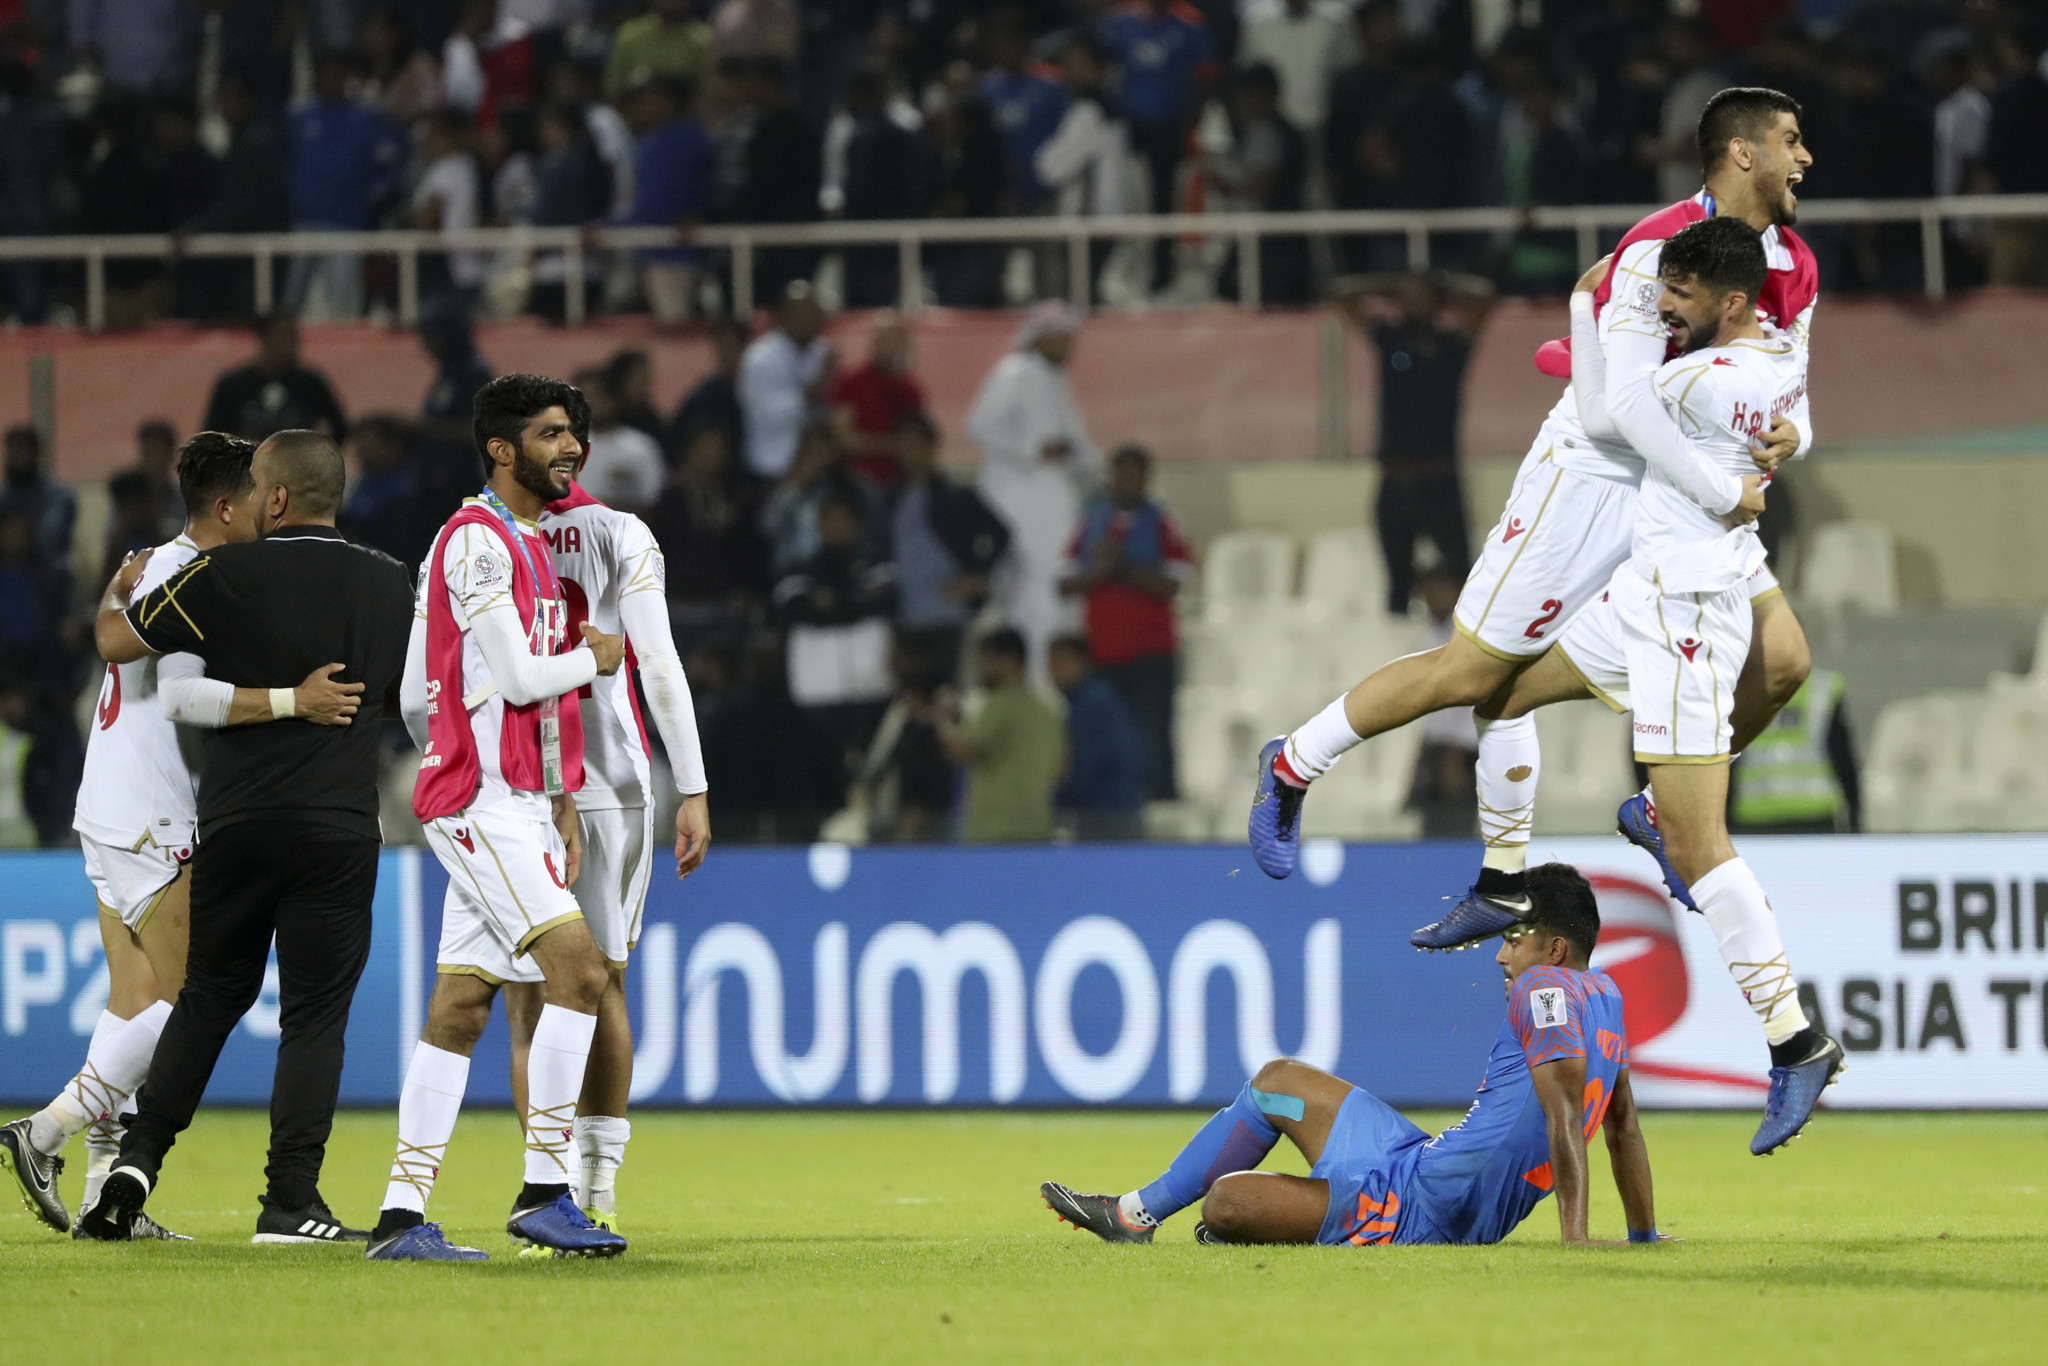 Late penalty knocks India out as UAE, Bahrain and Thailand progress at AFC Asian Cup